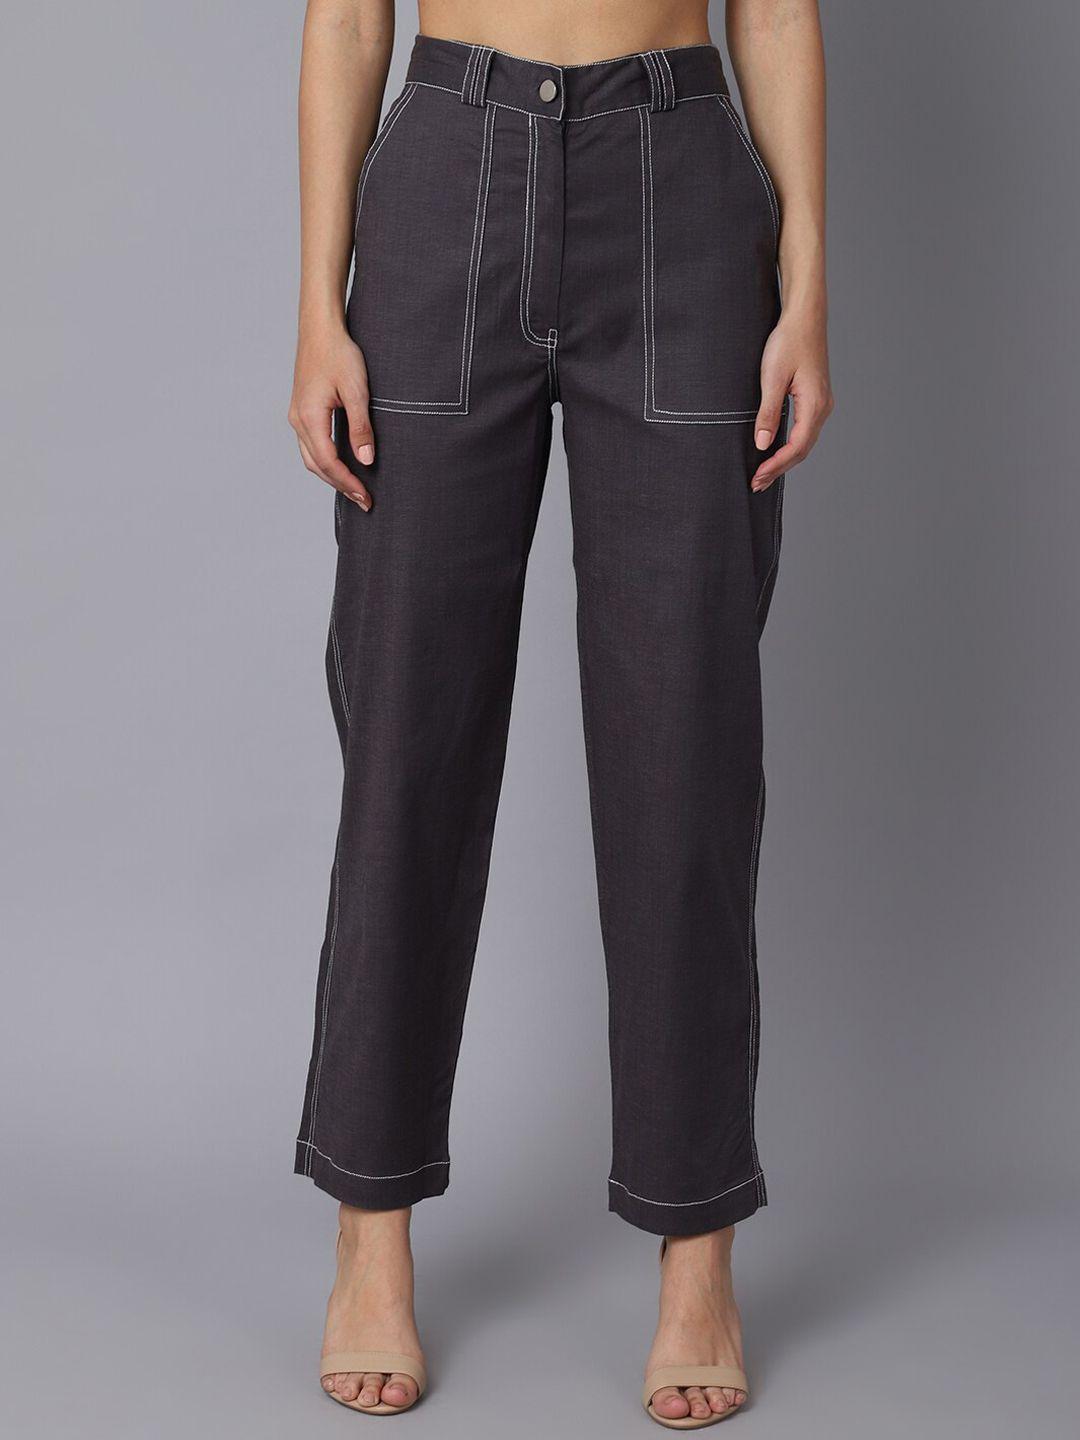 tag 7 women grey smart straight fit trousers